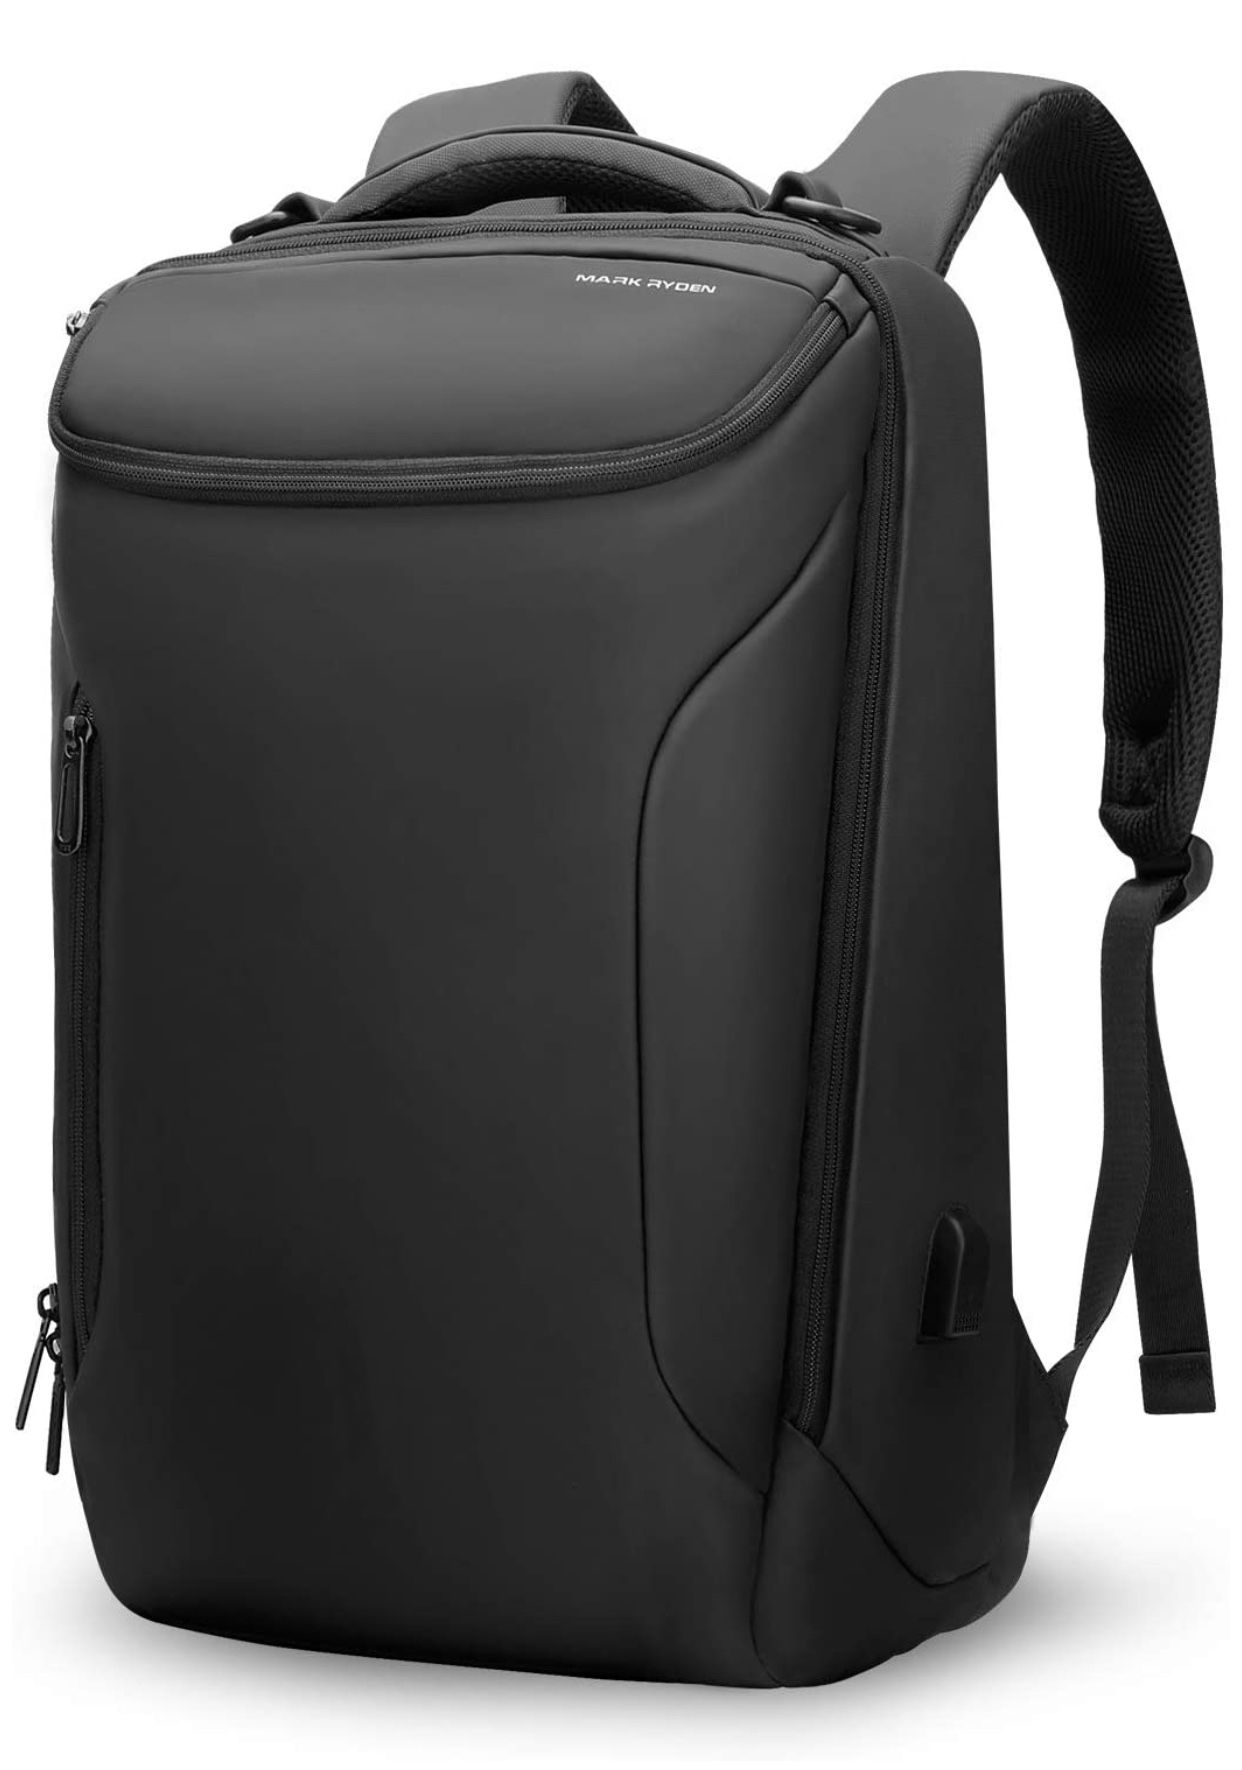 Brand New 17.3 Business Backpack Waterproof laptop Backpack for School Travel Work Flight Fits 17.3 Laptop With USB Port,30L Carry On